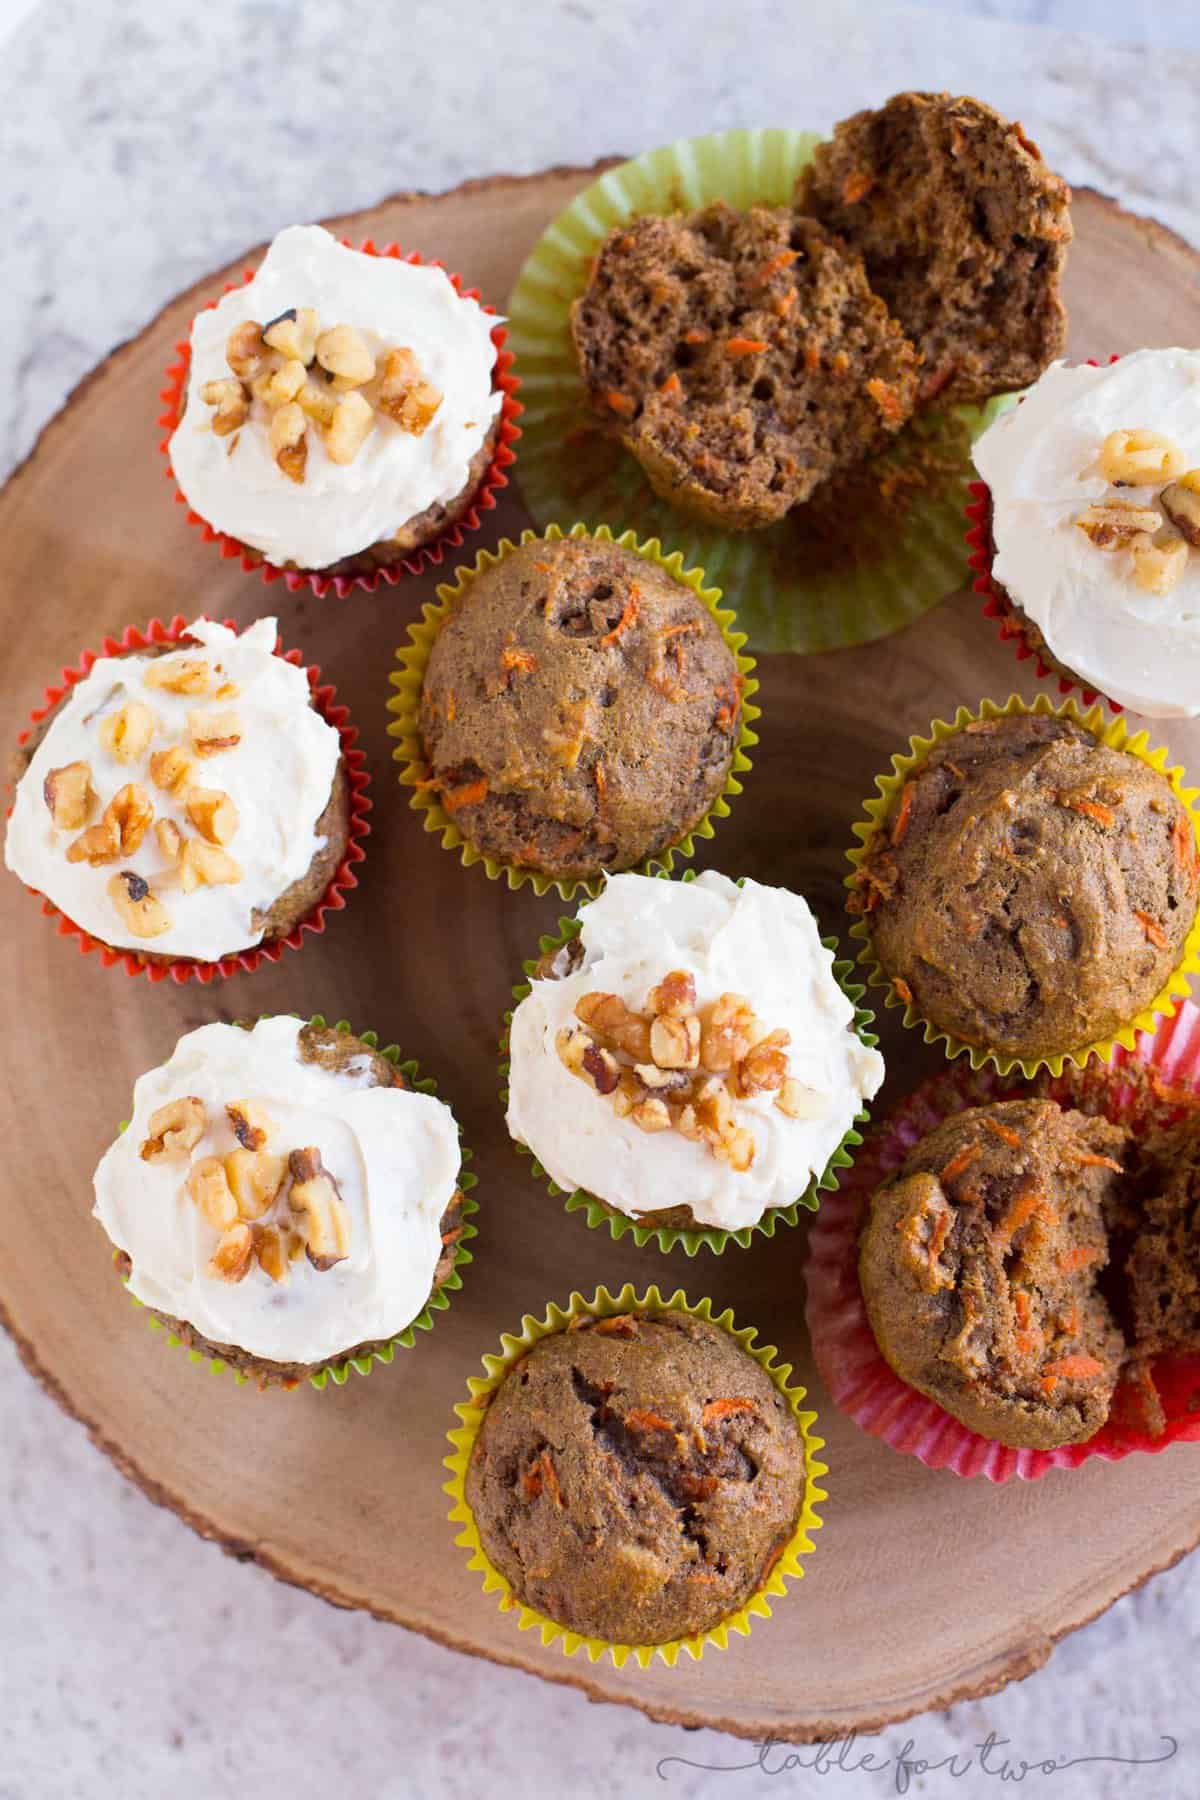 Tender and moist carrot cake muffins that are topped generously with a cream cheese frosting. The perfect muffins when you don't want to make an entire carrot cake! An easy and pretty healthy treat for any occasion or for Easter celebrations!